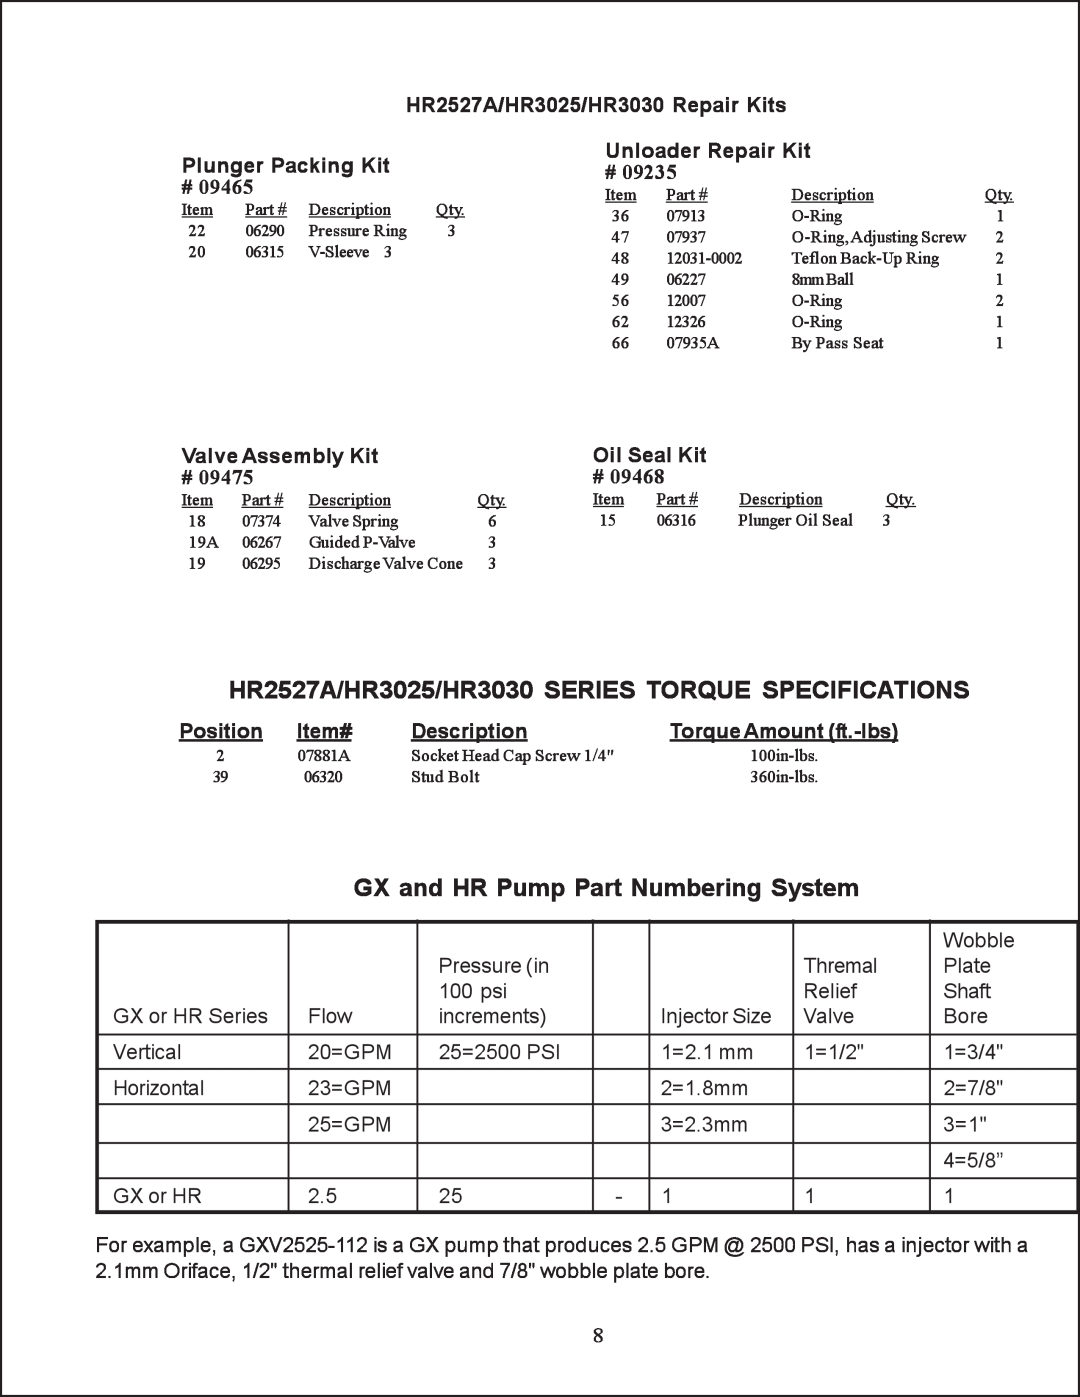 Giant operating instructions HR2527A/HR3025/HR3030 SERIES TORQUE SPECIFICATIONS, GX and HR Pump Part Numbering System 